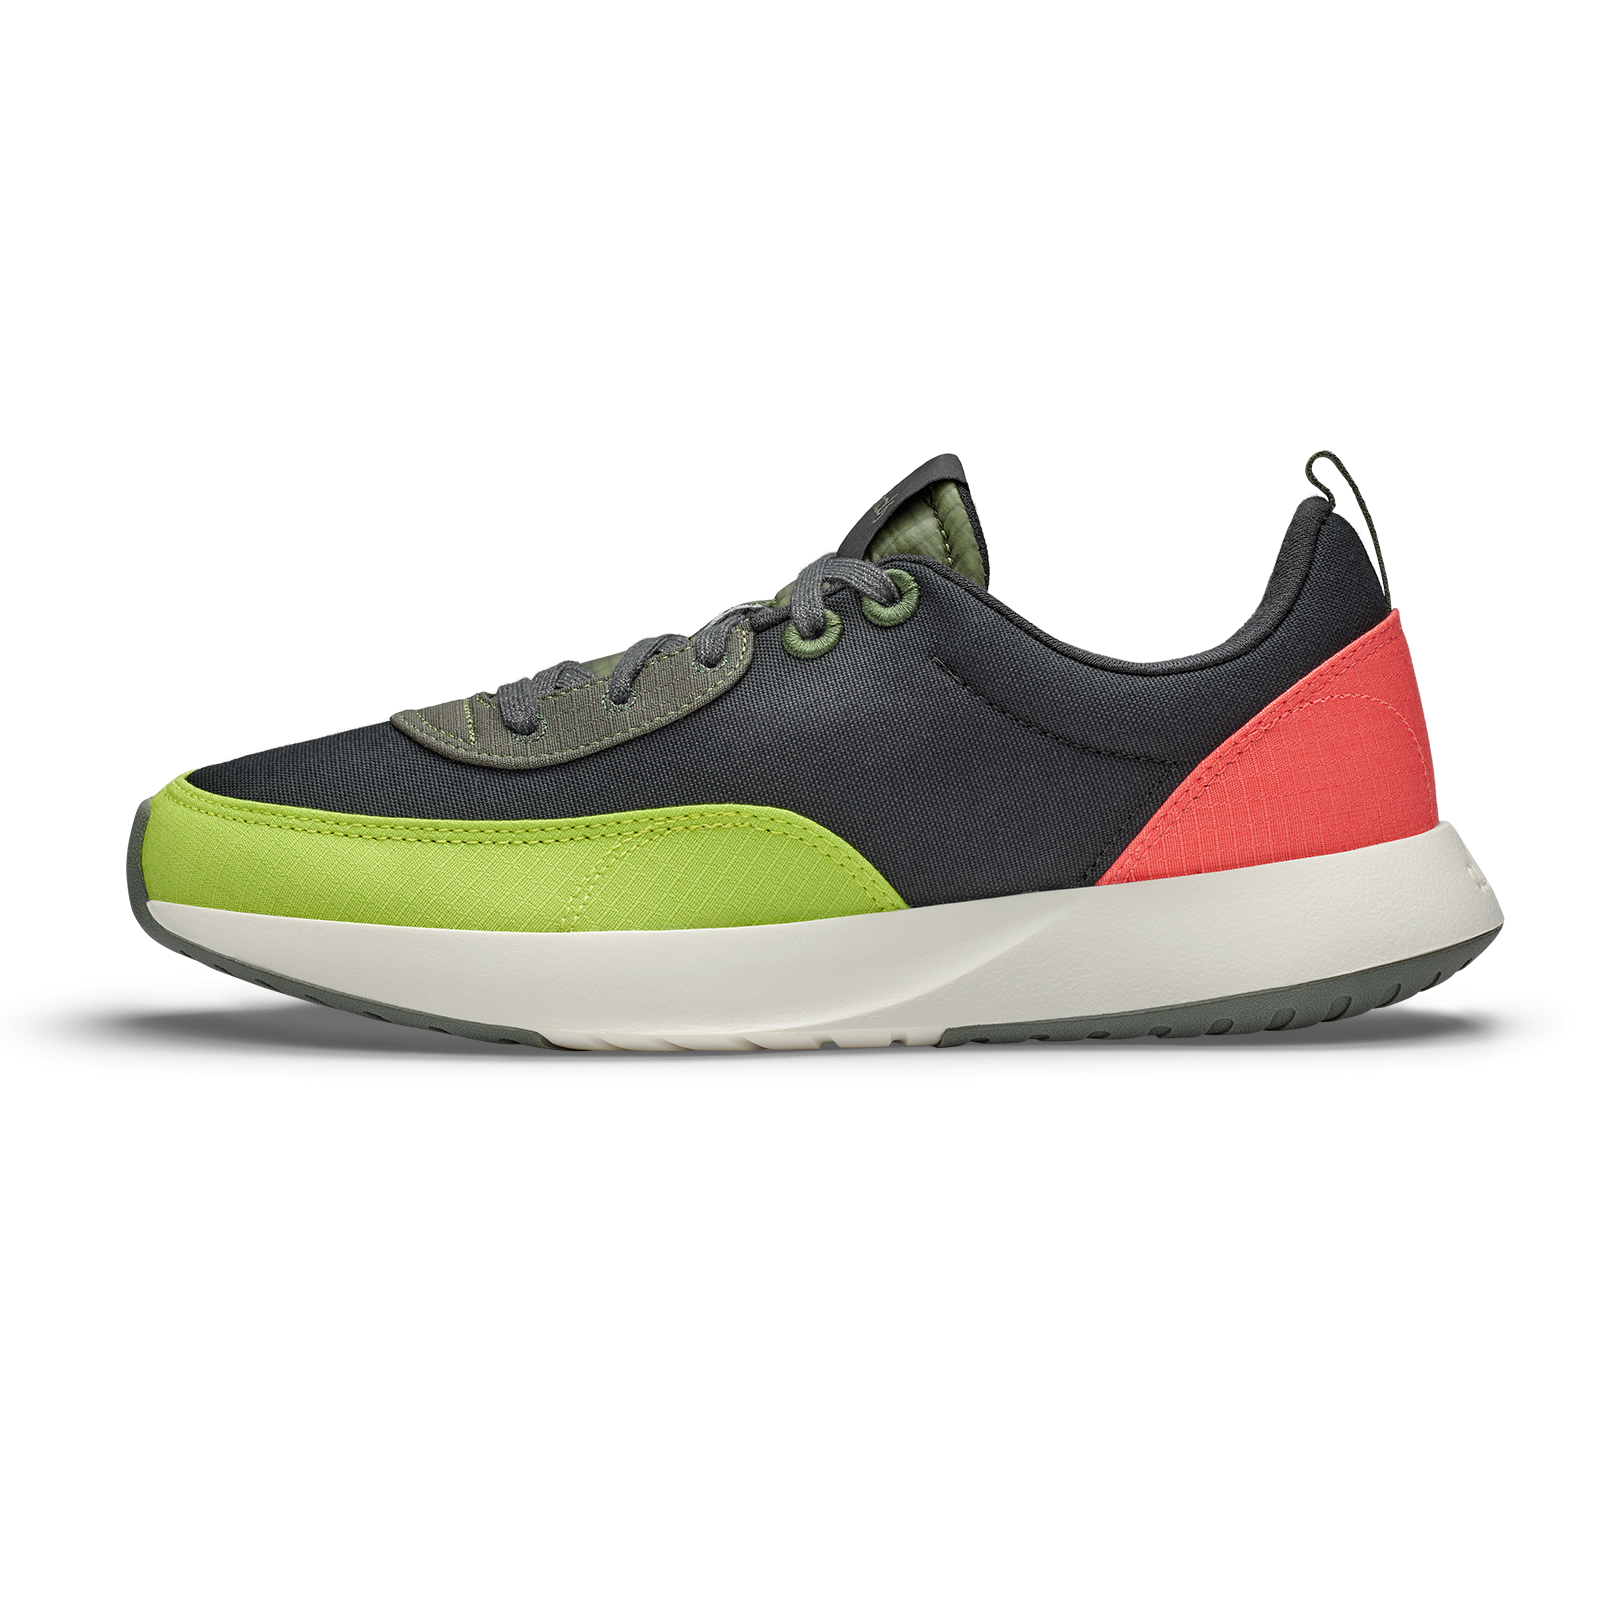 Women's Couriers - Natural Black / Bloom Green (Blizzard Sole)